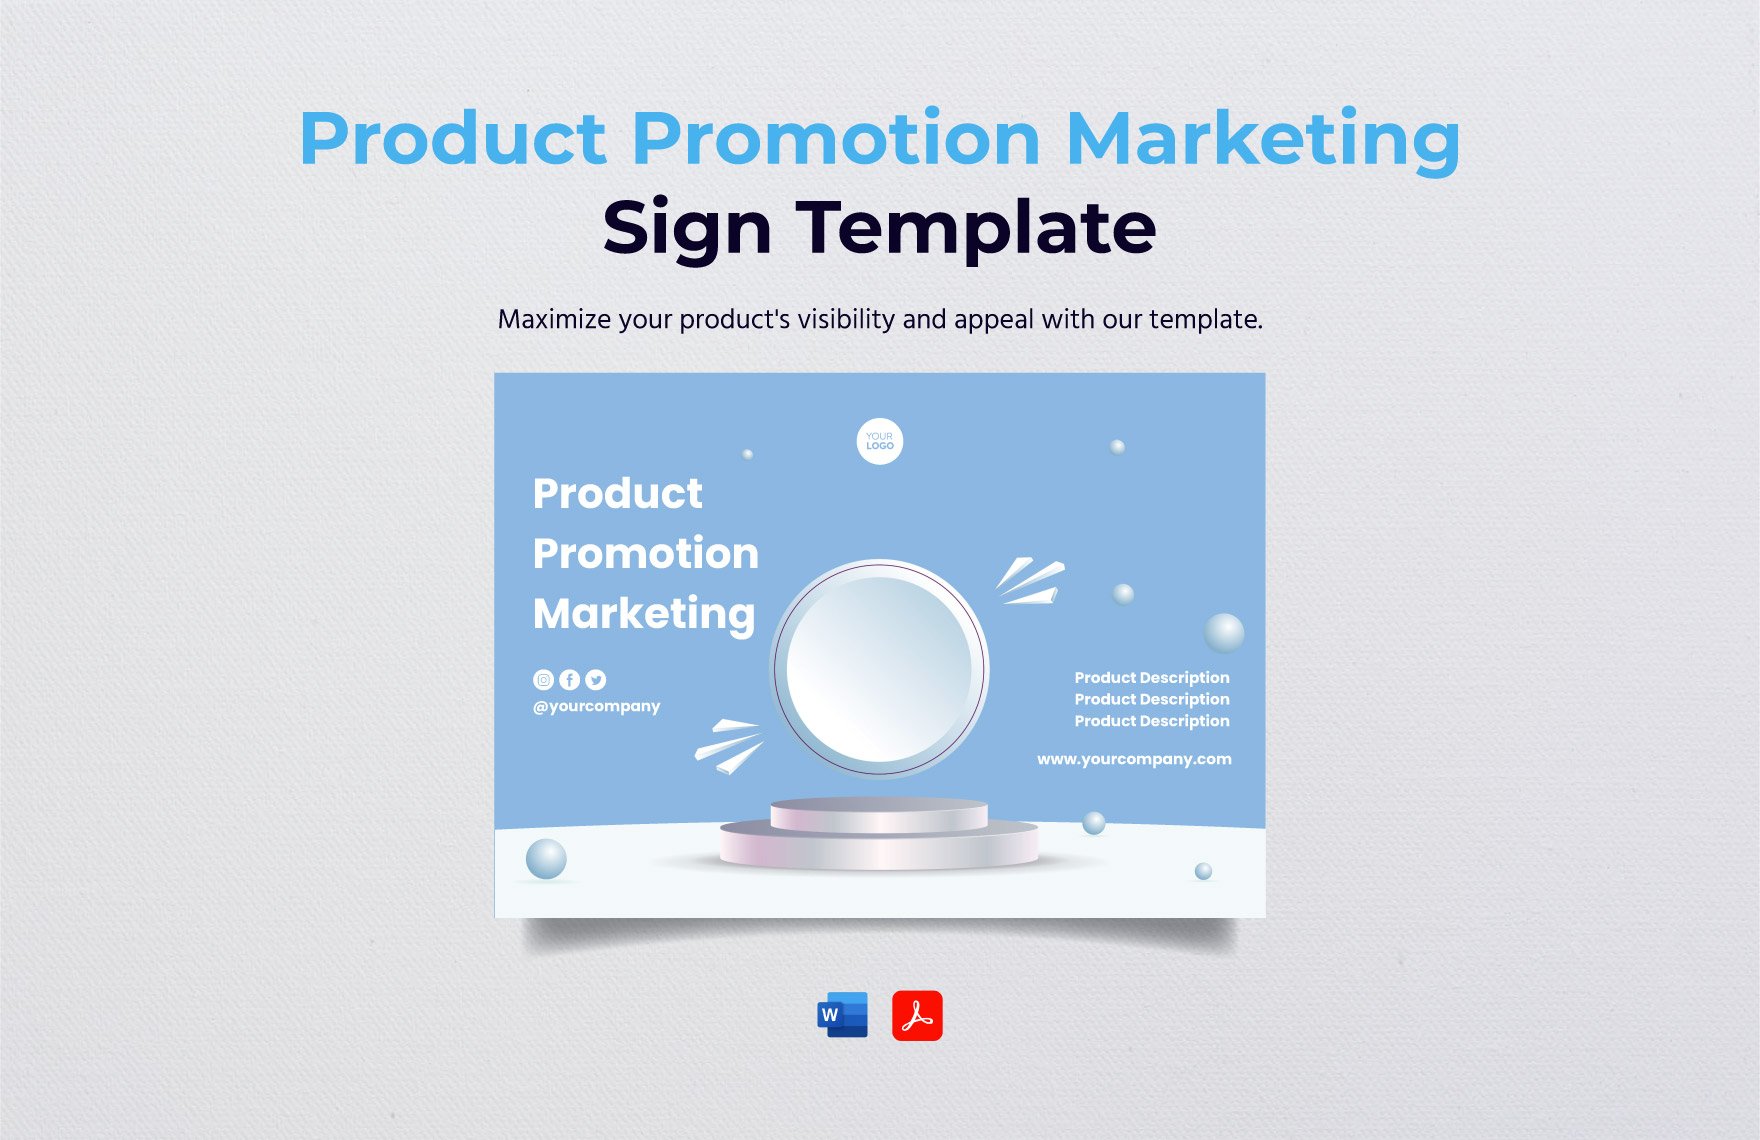 Product Promotion Marketing Sign Template